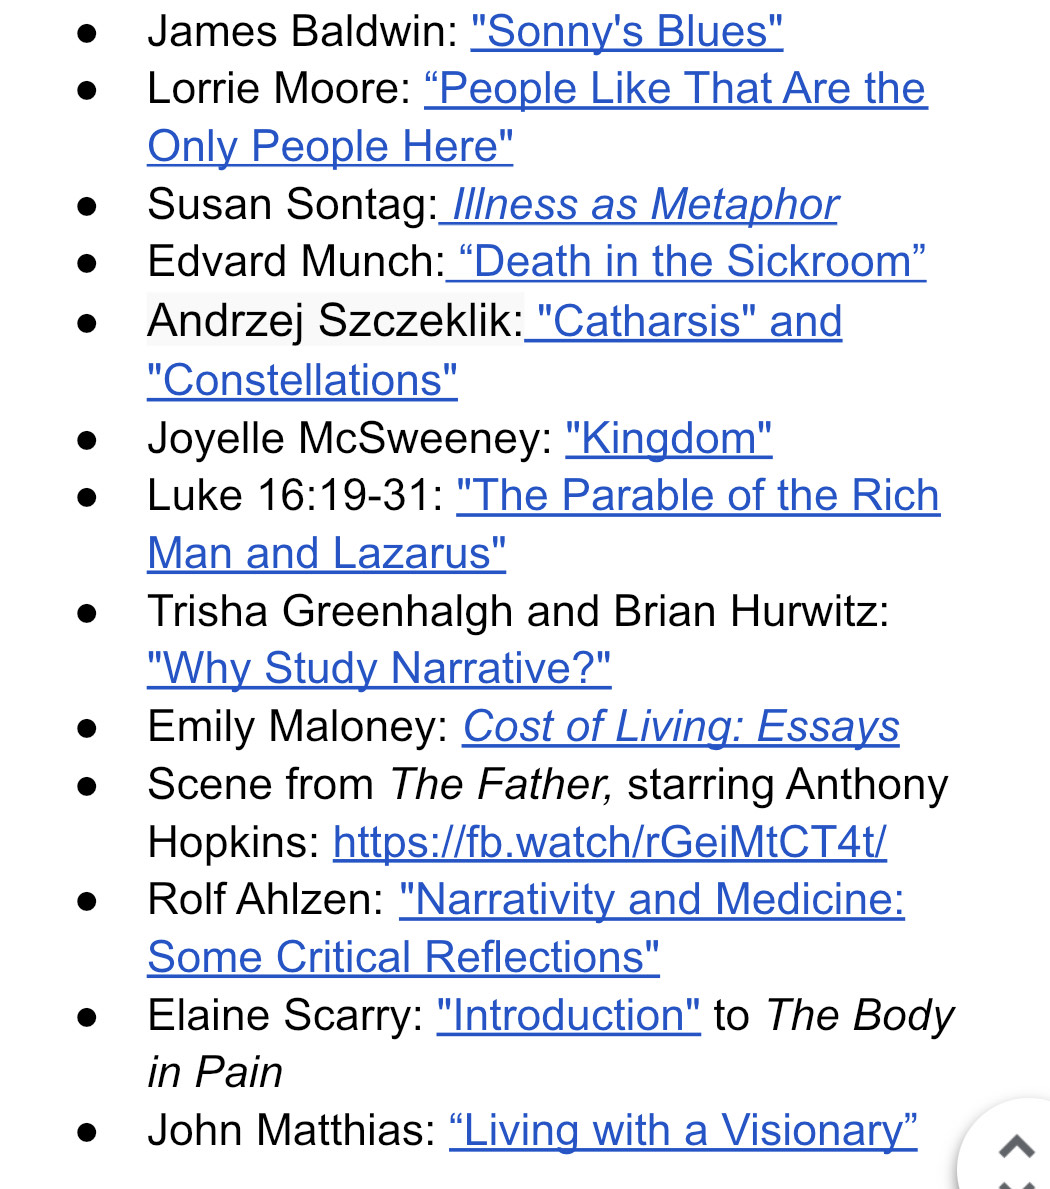 Just finished updating the list of texts we read in my course 'Writer as Physician; Physician as Writer' for my students to reference when writing their final exam, and thought I would share it with y'all. They are listed in the order we read them. #narrativemed #medhum